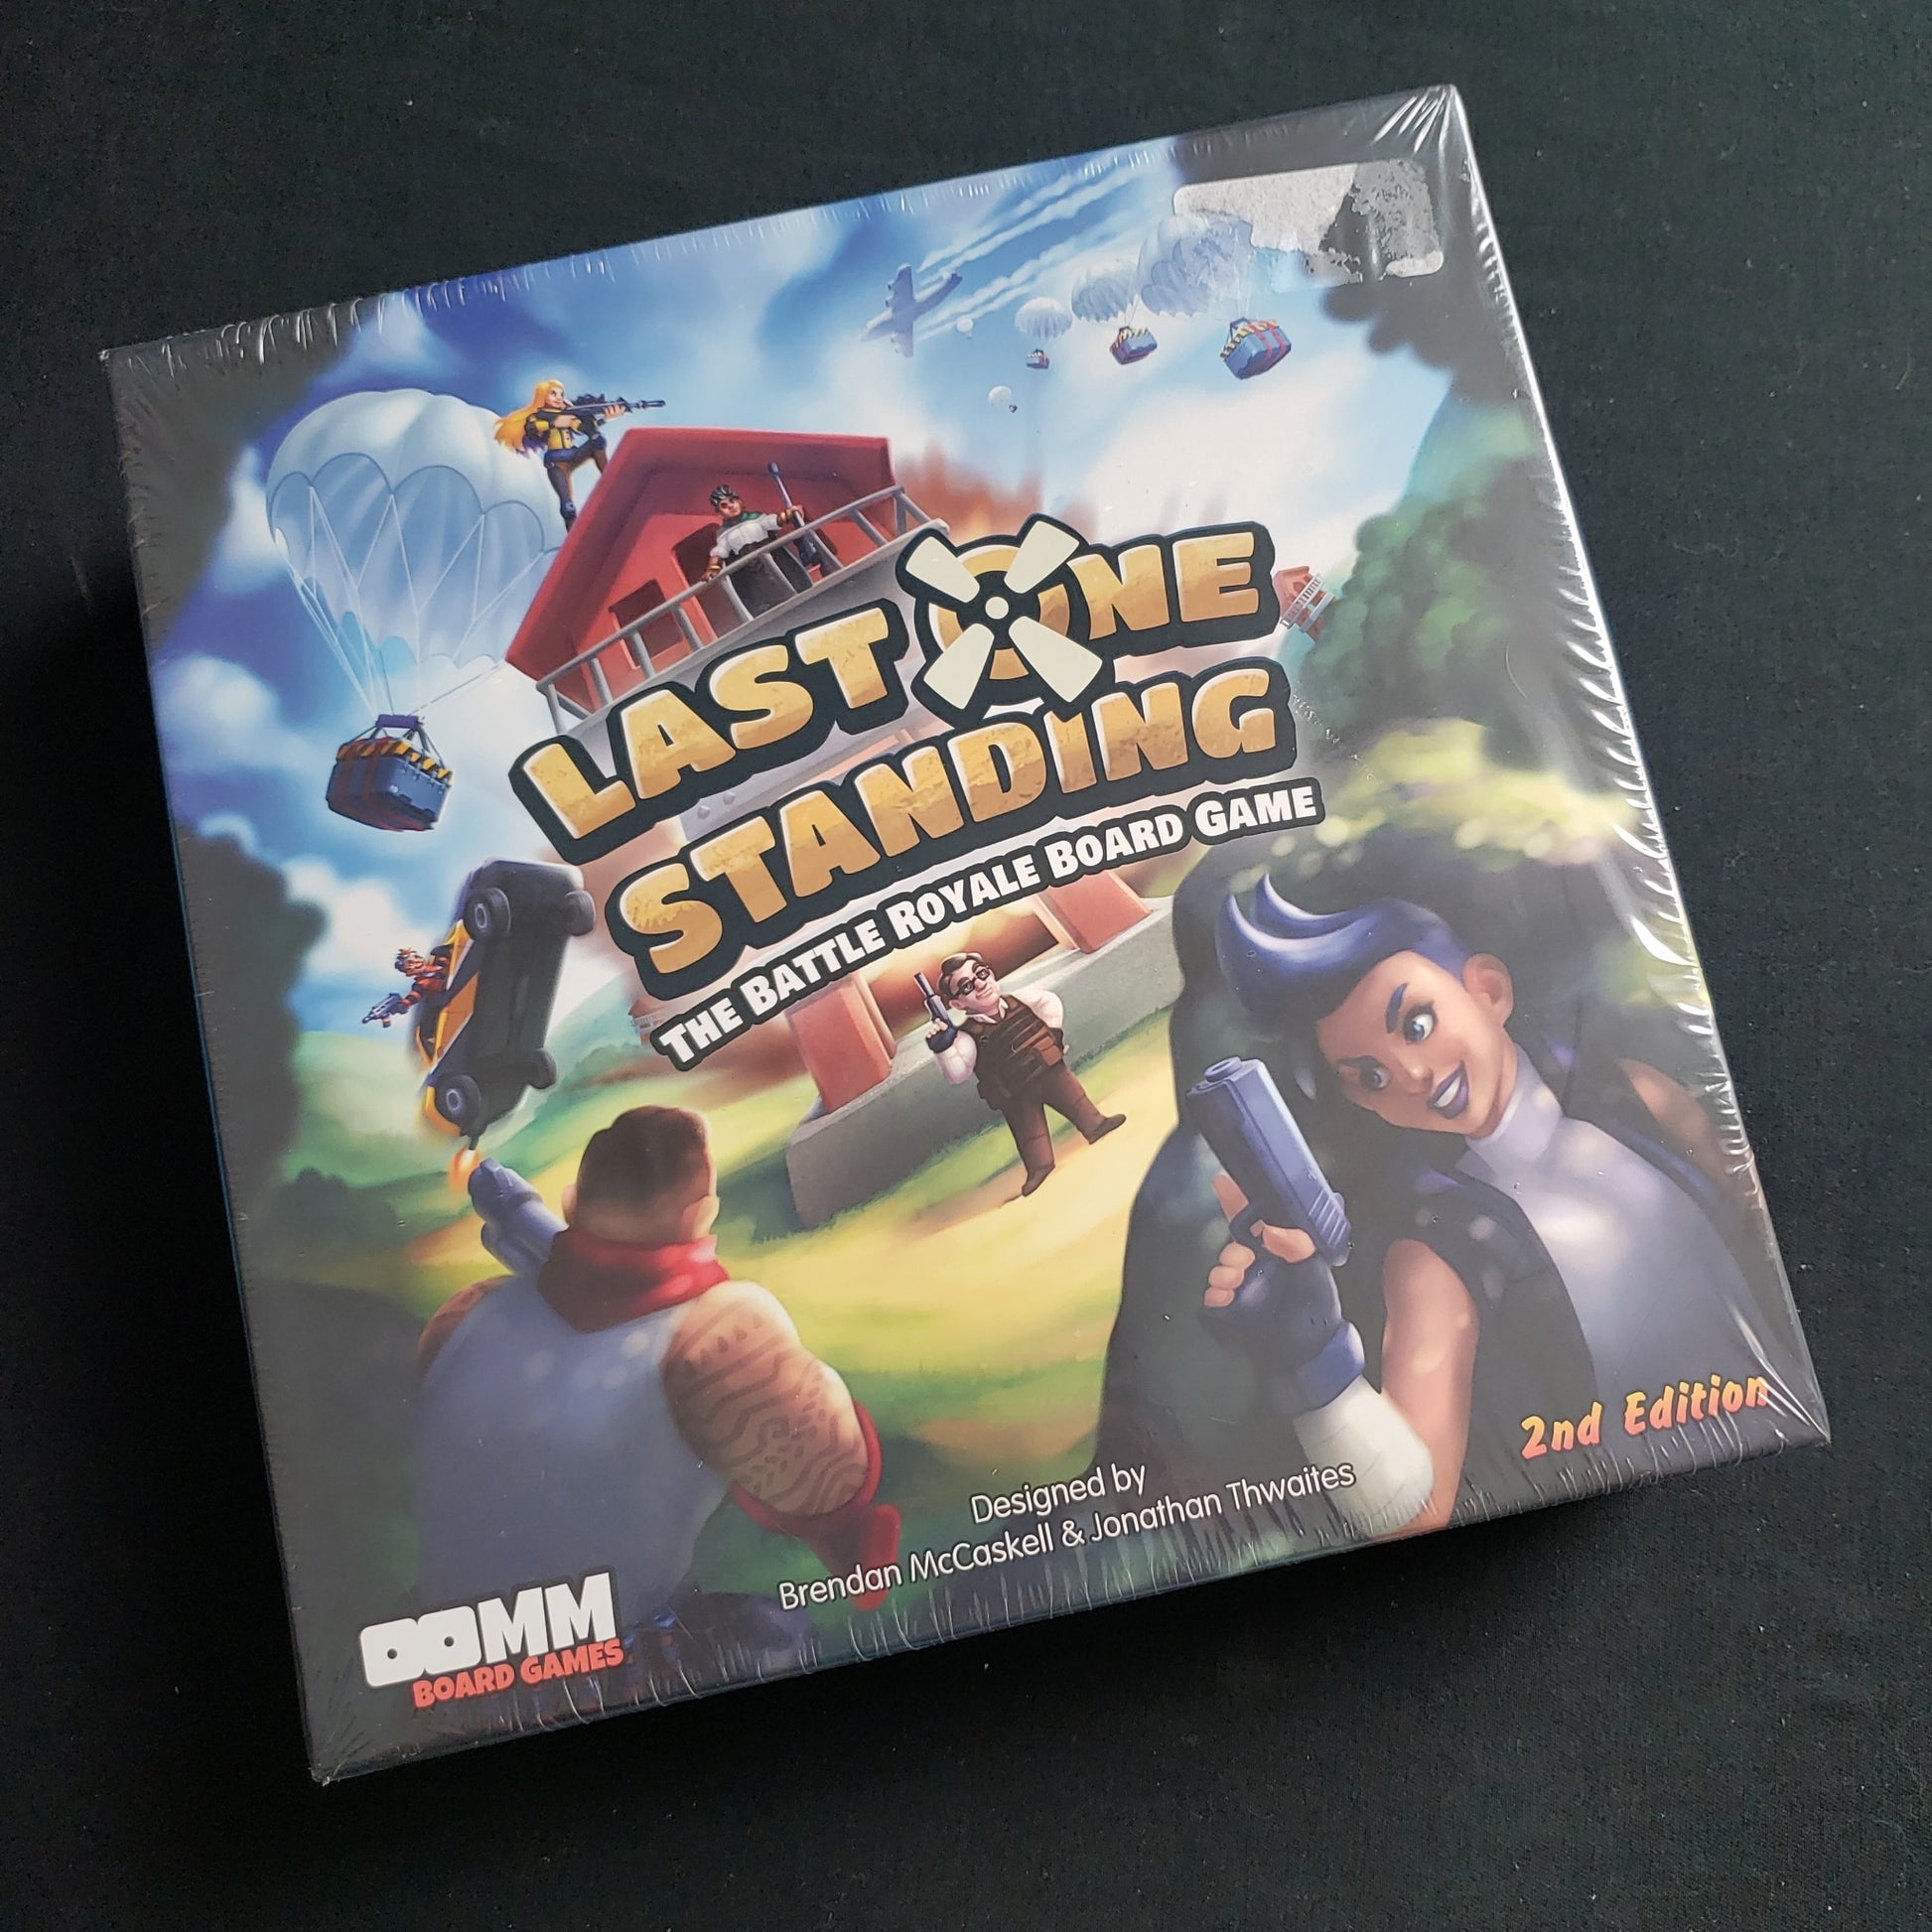 Image shows the front cover of the box of the Last One Standing board game